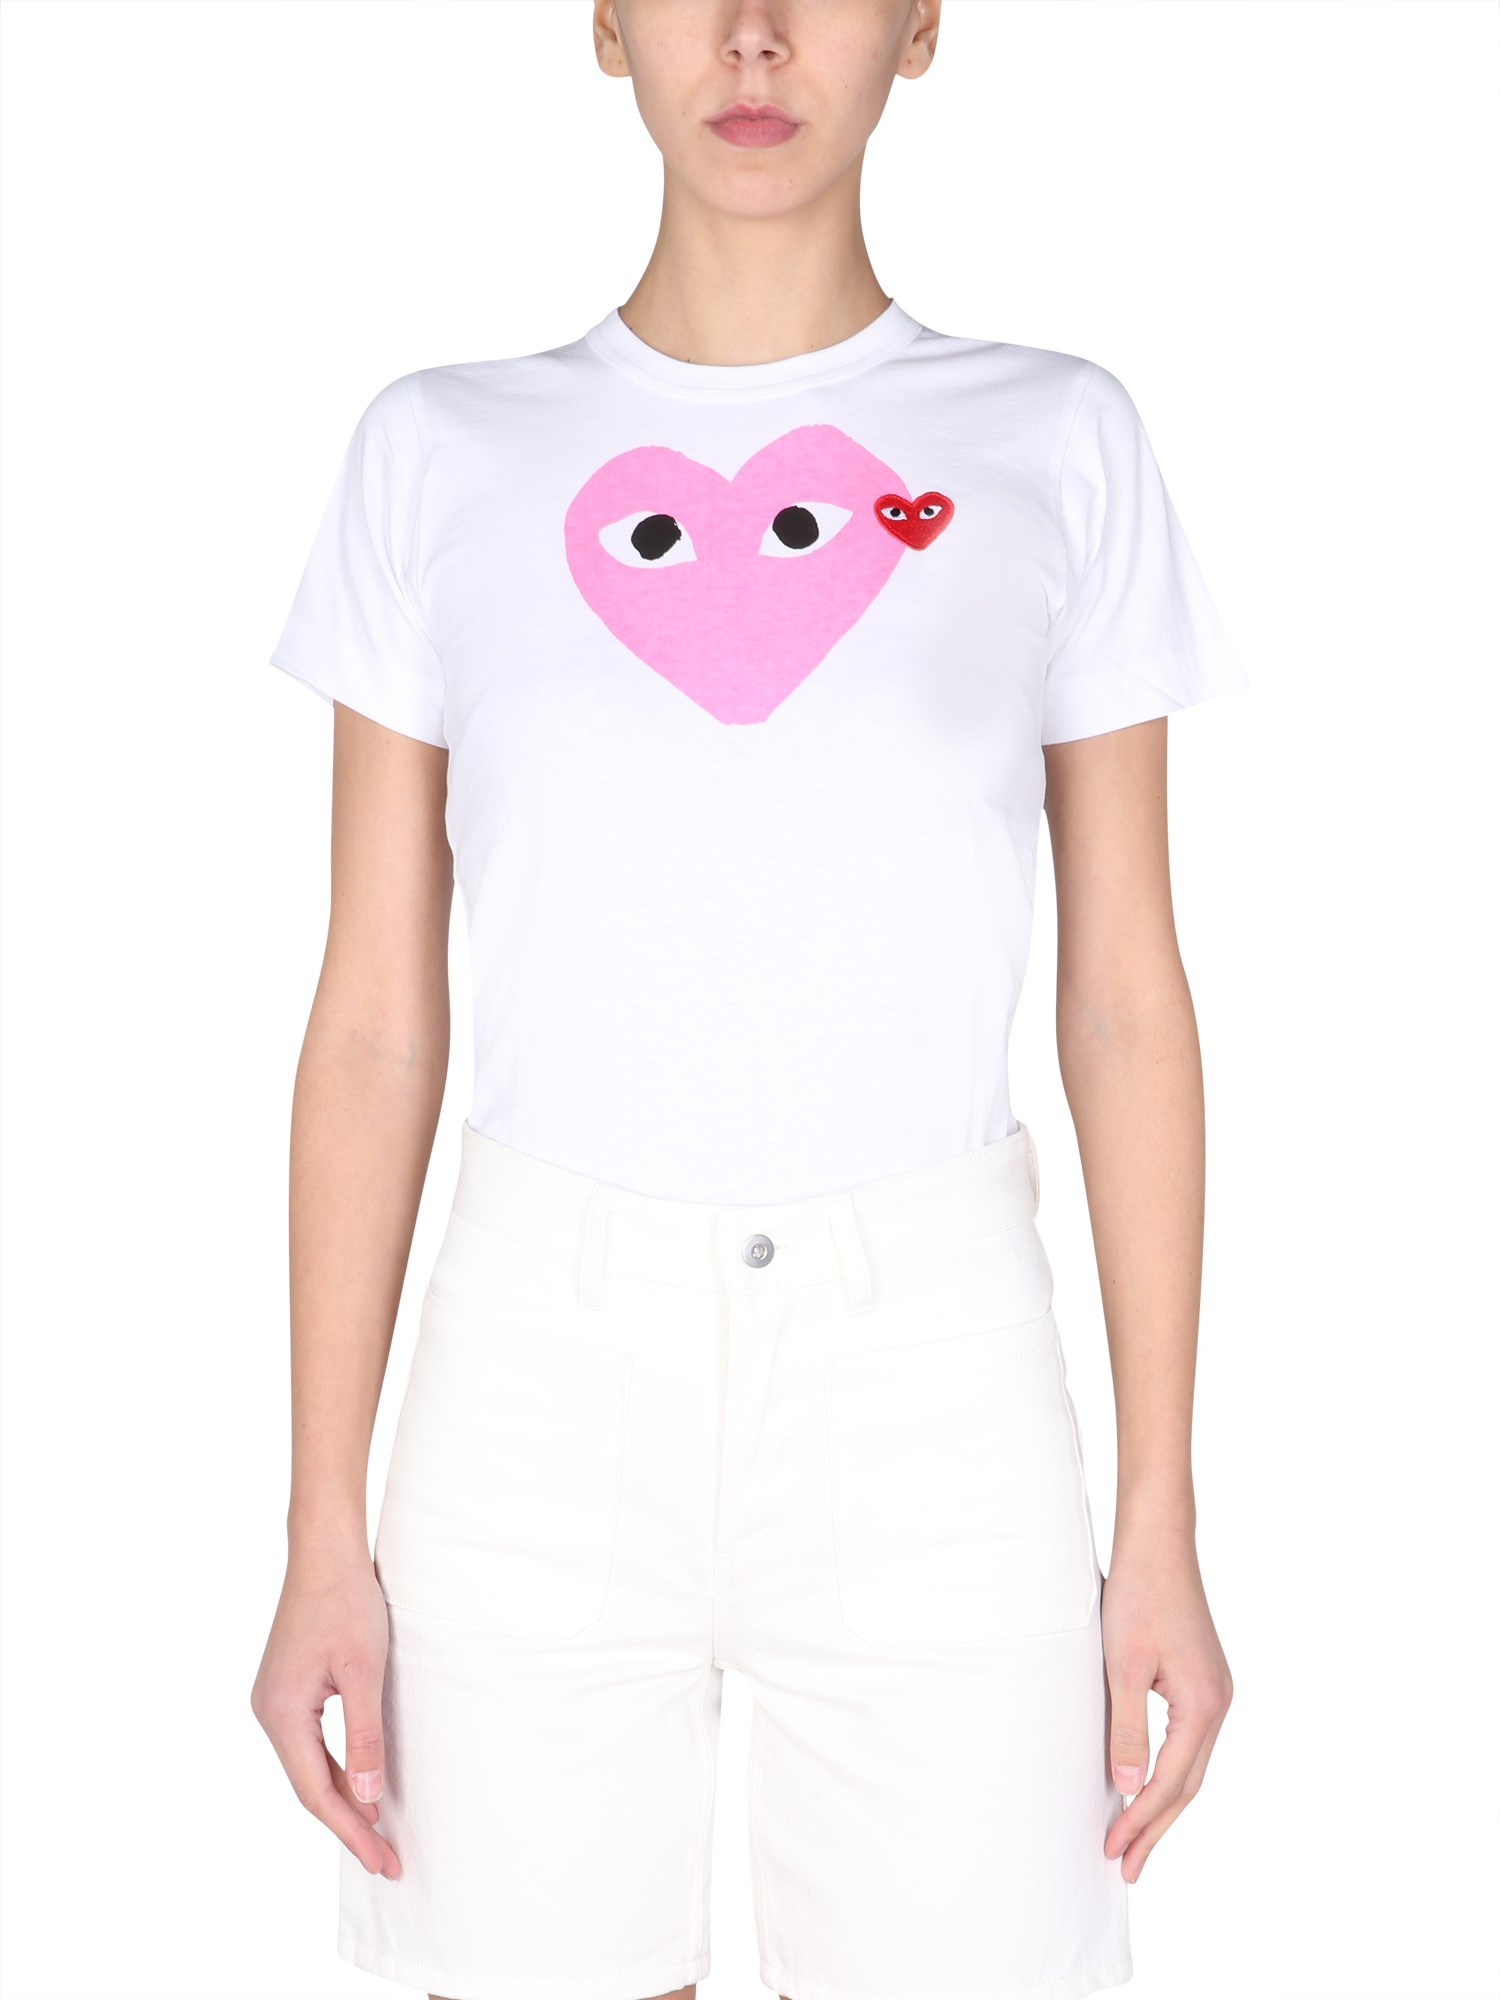 comme des garcons play t-shirt in cotone con stampa logo